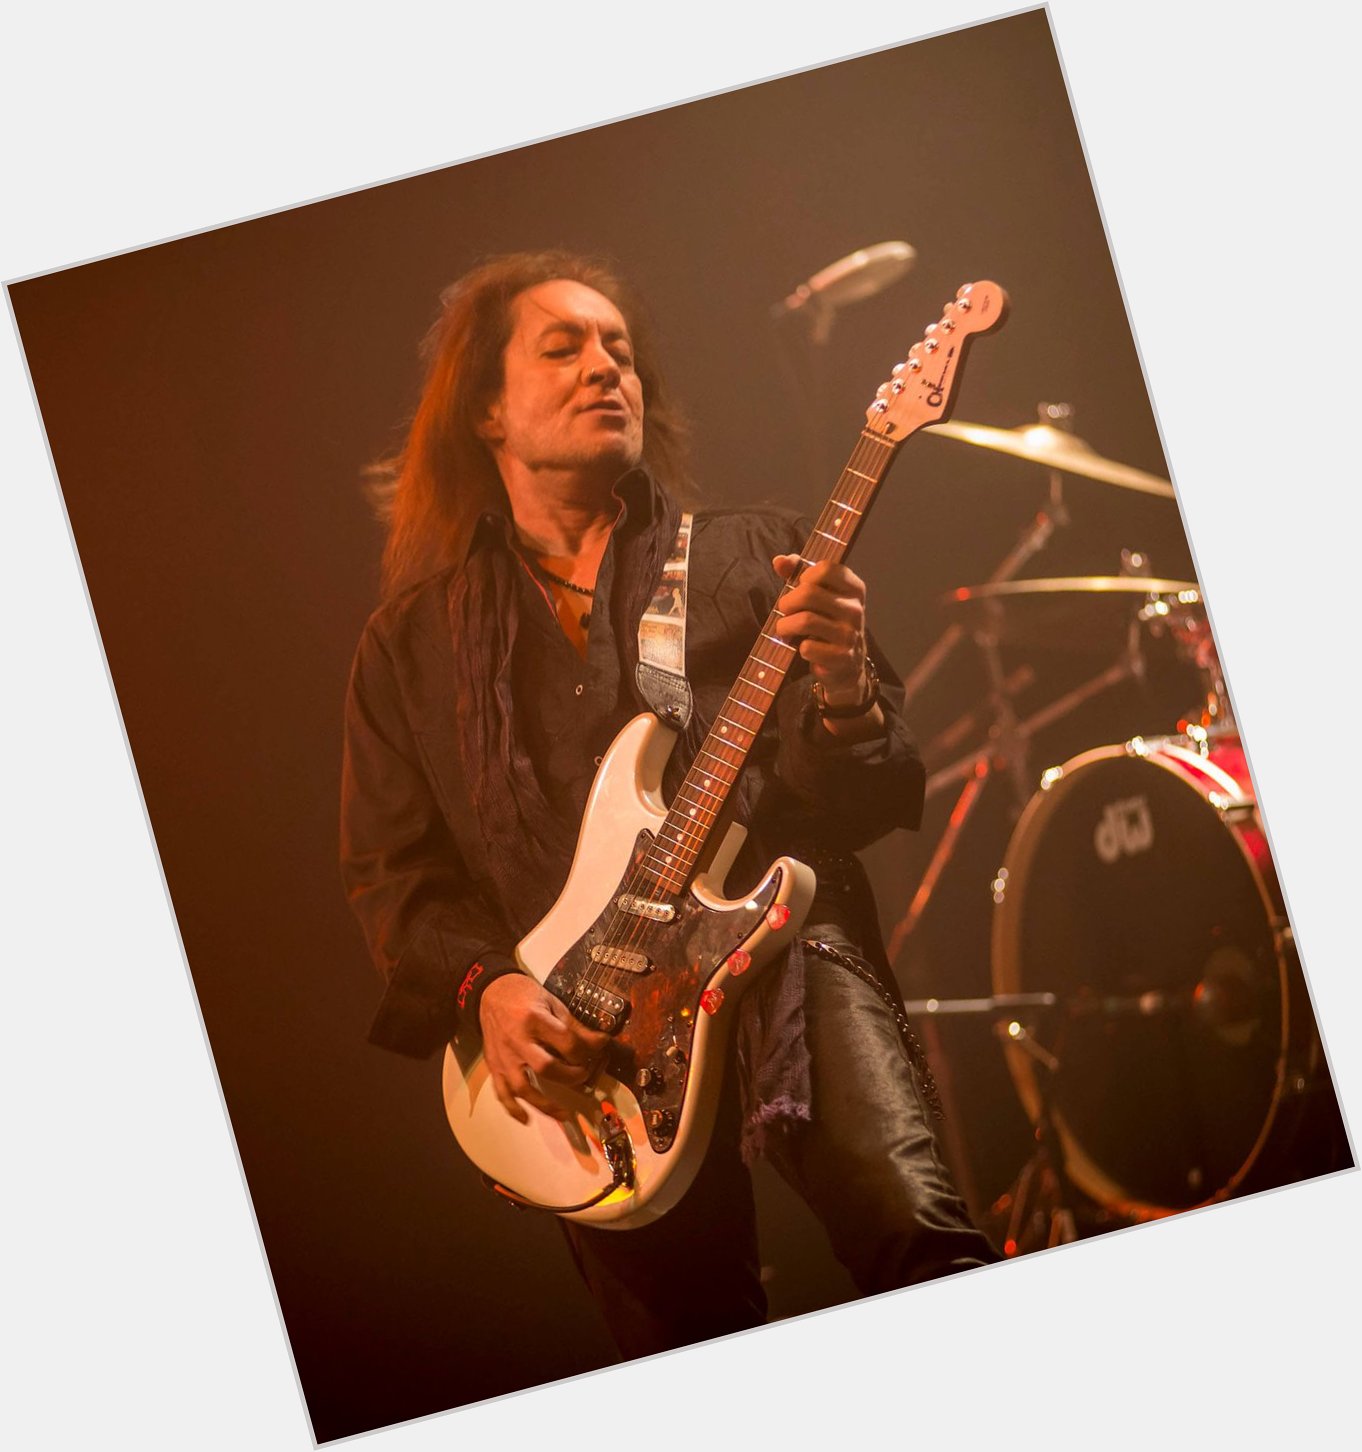 Please join us here at UndercoverIndie in wishing Jake E Lee a very Happy Birthday today.  